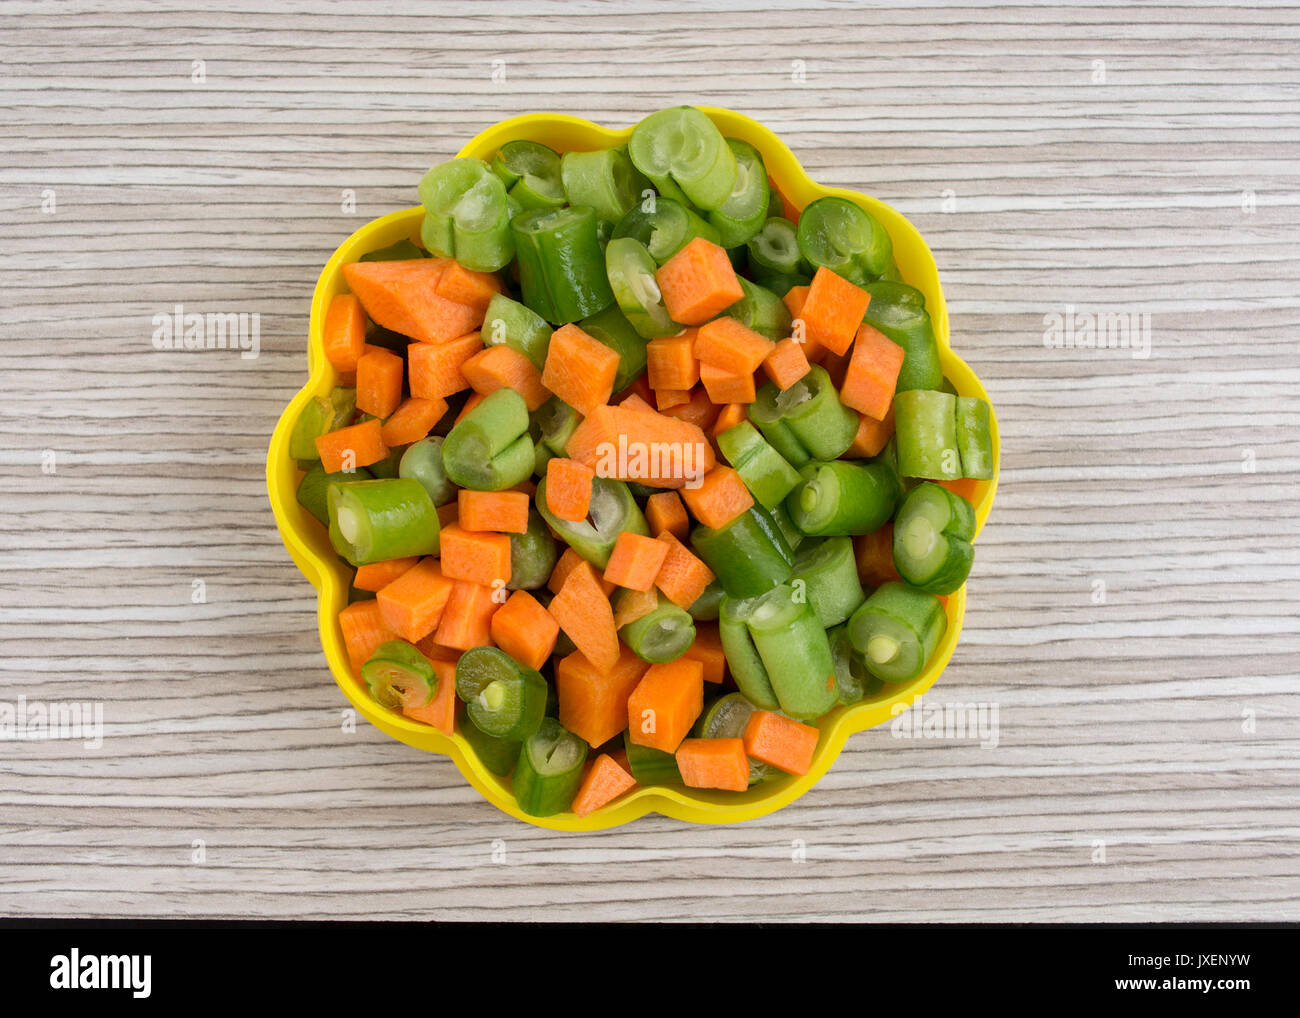 Sun shape by various vegetables on the table. Stock Photo